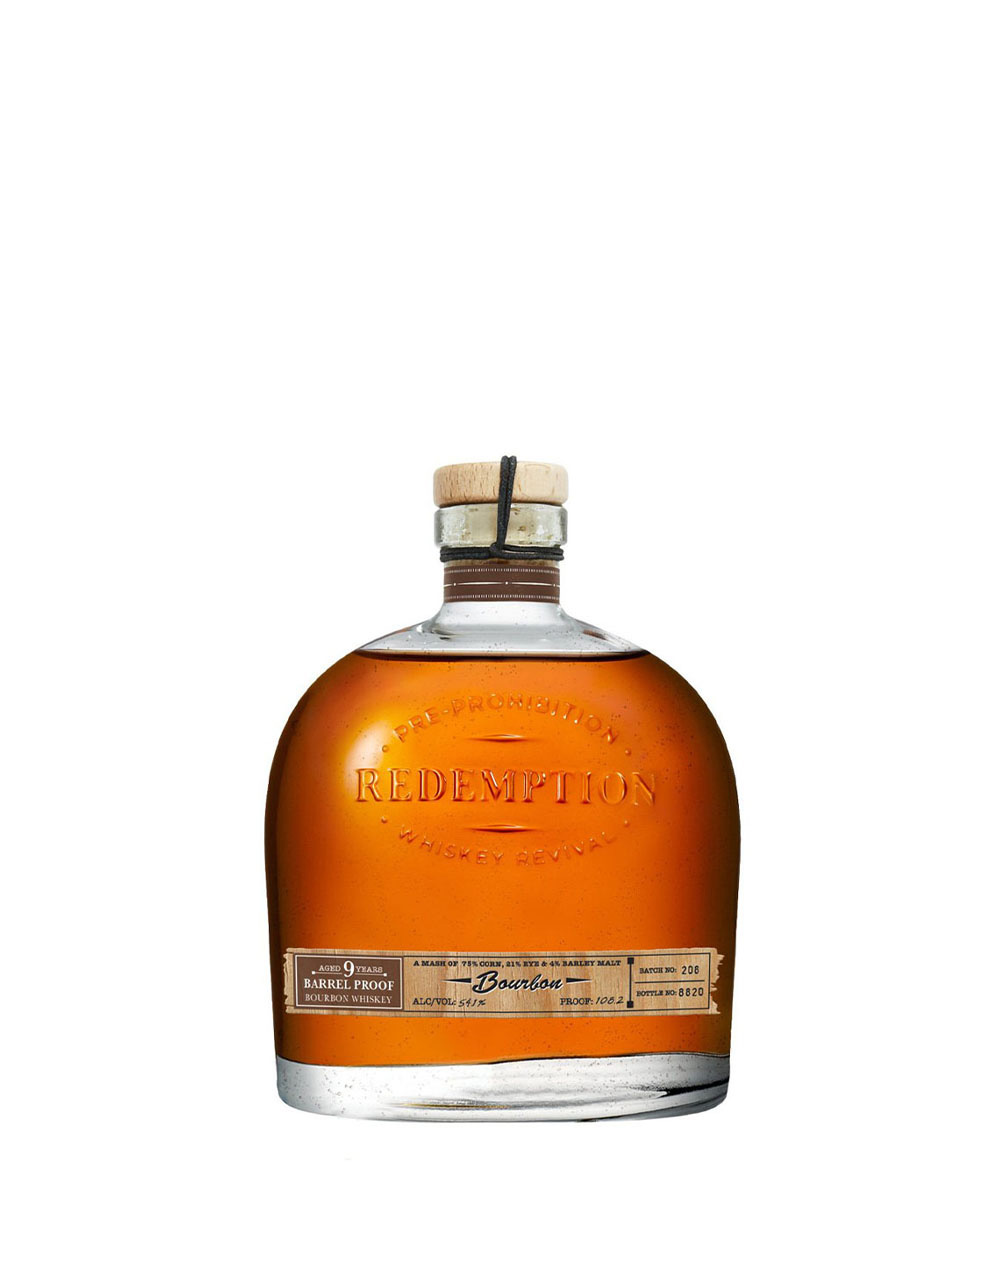 Redemption 9 Year Old Barrel Proof Bourbon Whiskey